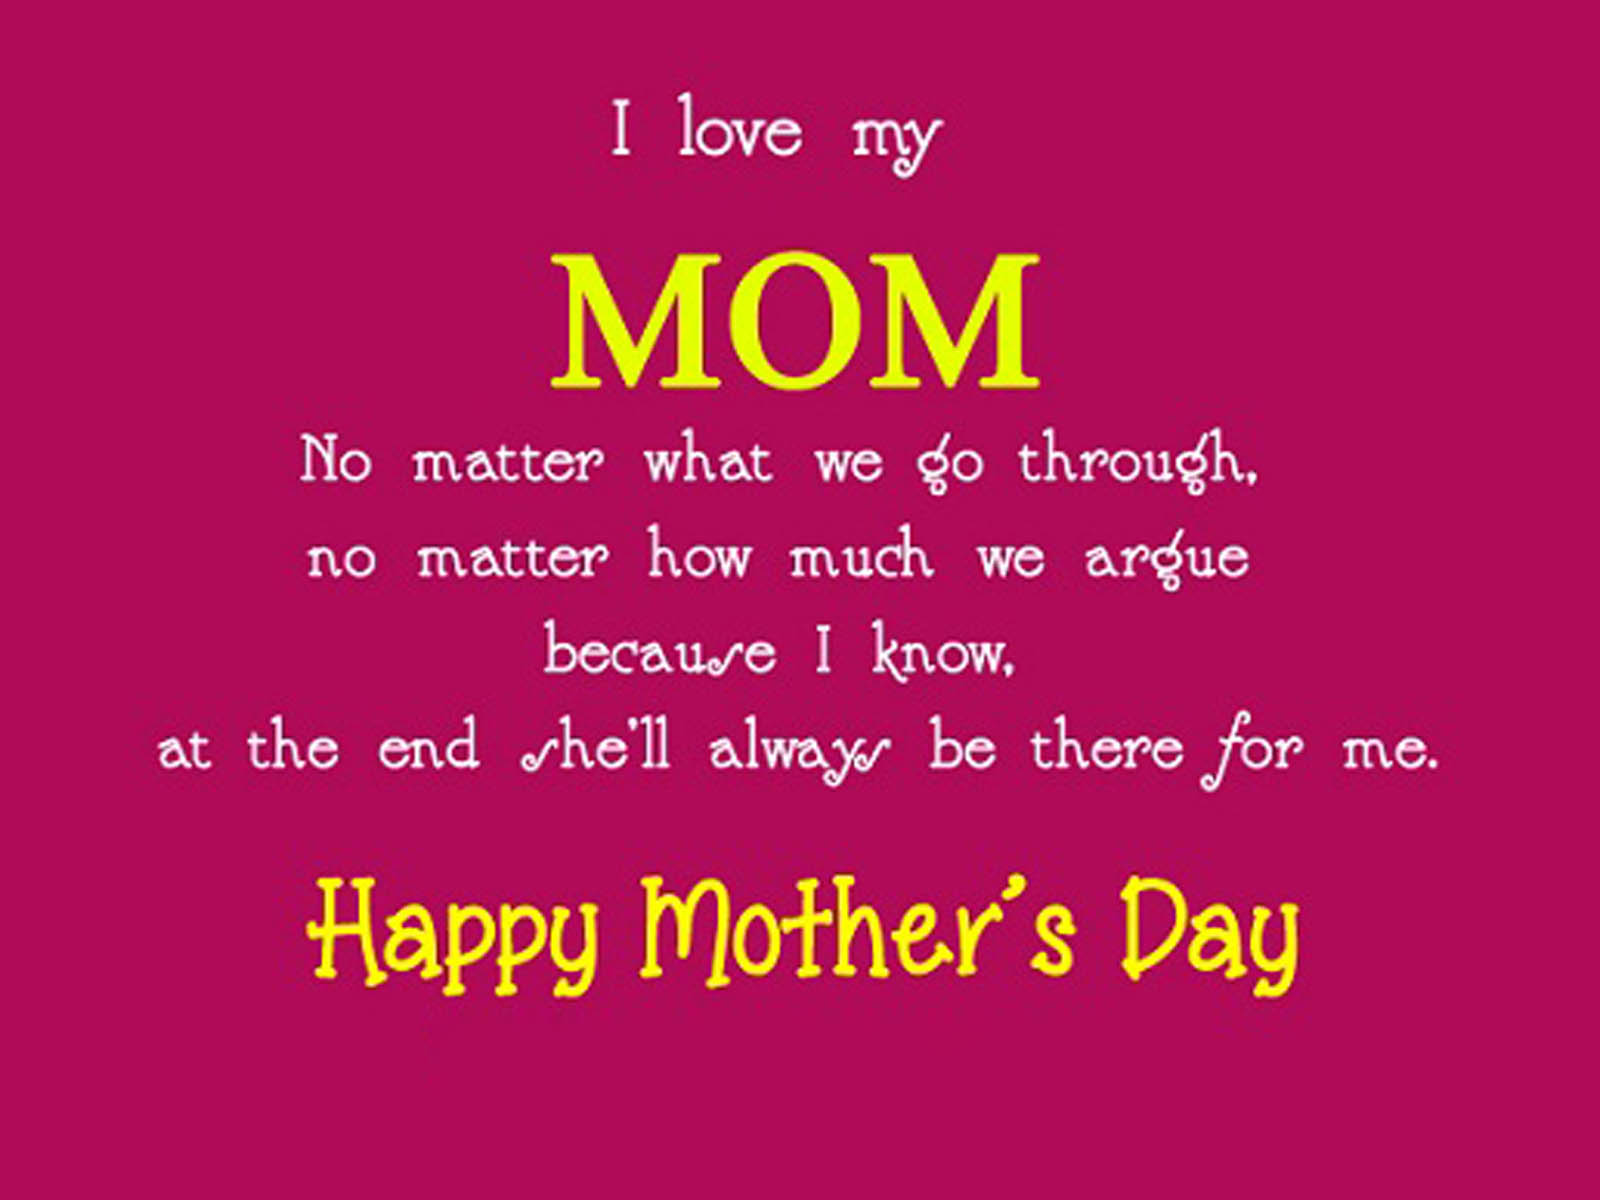 HD Wallpapers: Happy Mother's Day Quotes